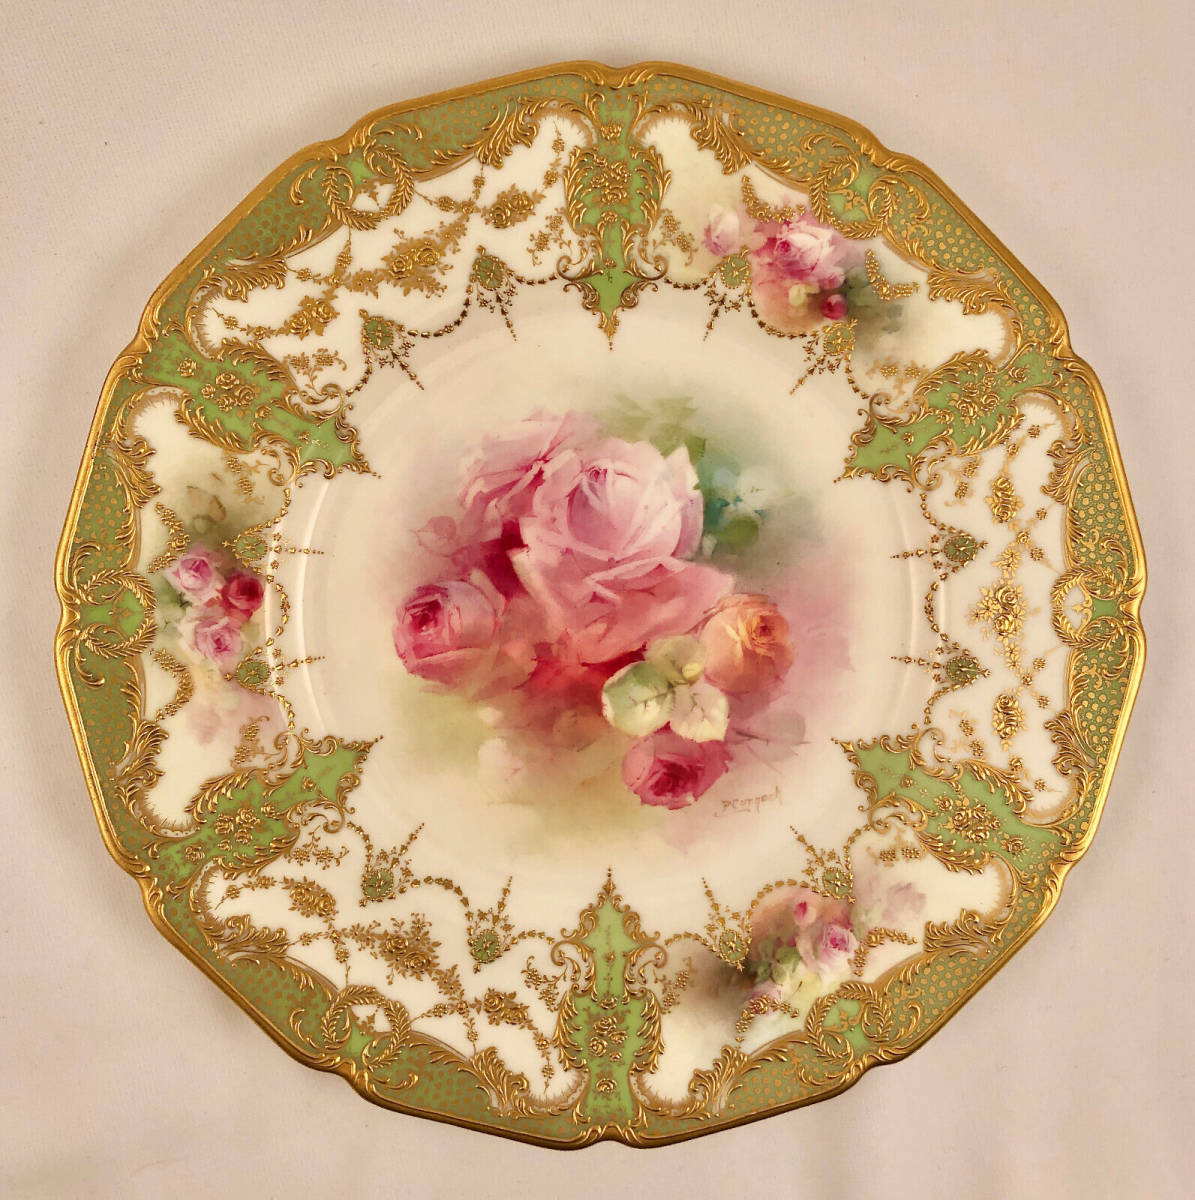 Antique Royal Doulton Plate/Charger, Hand Painted Roses, Signed Curnock 海外 即決